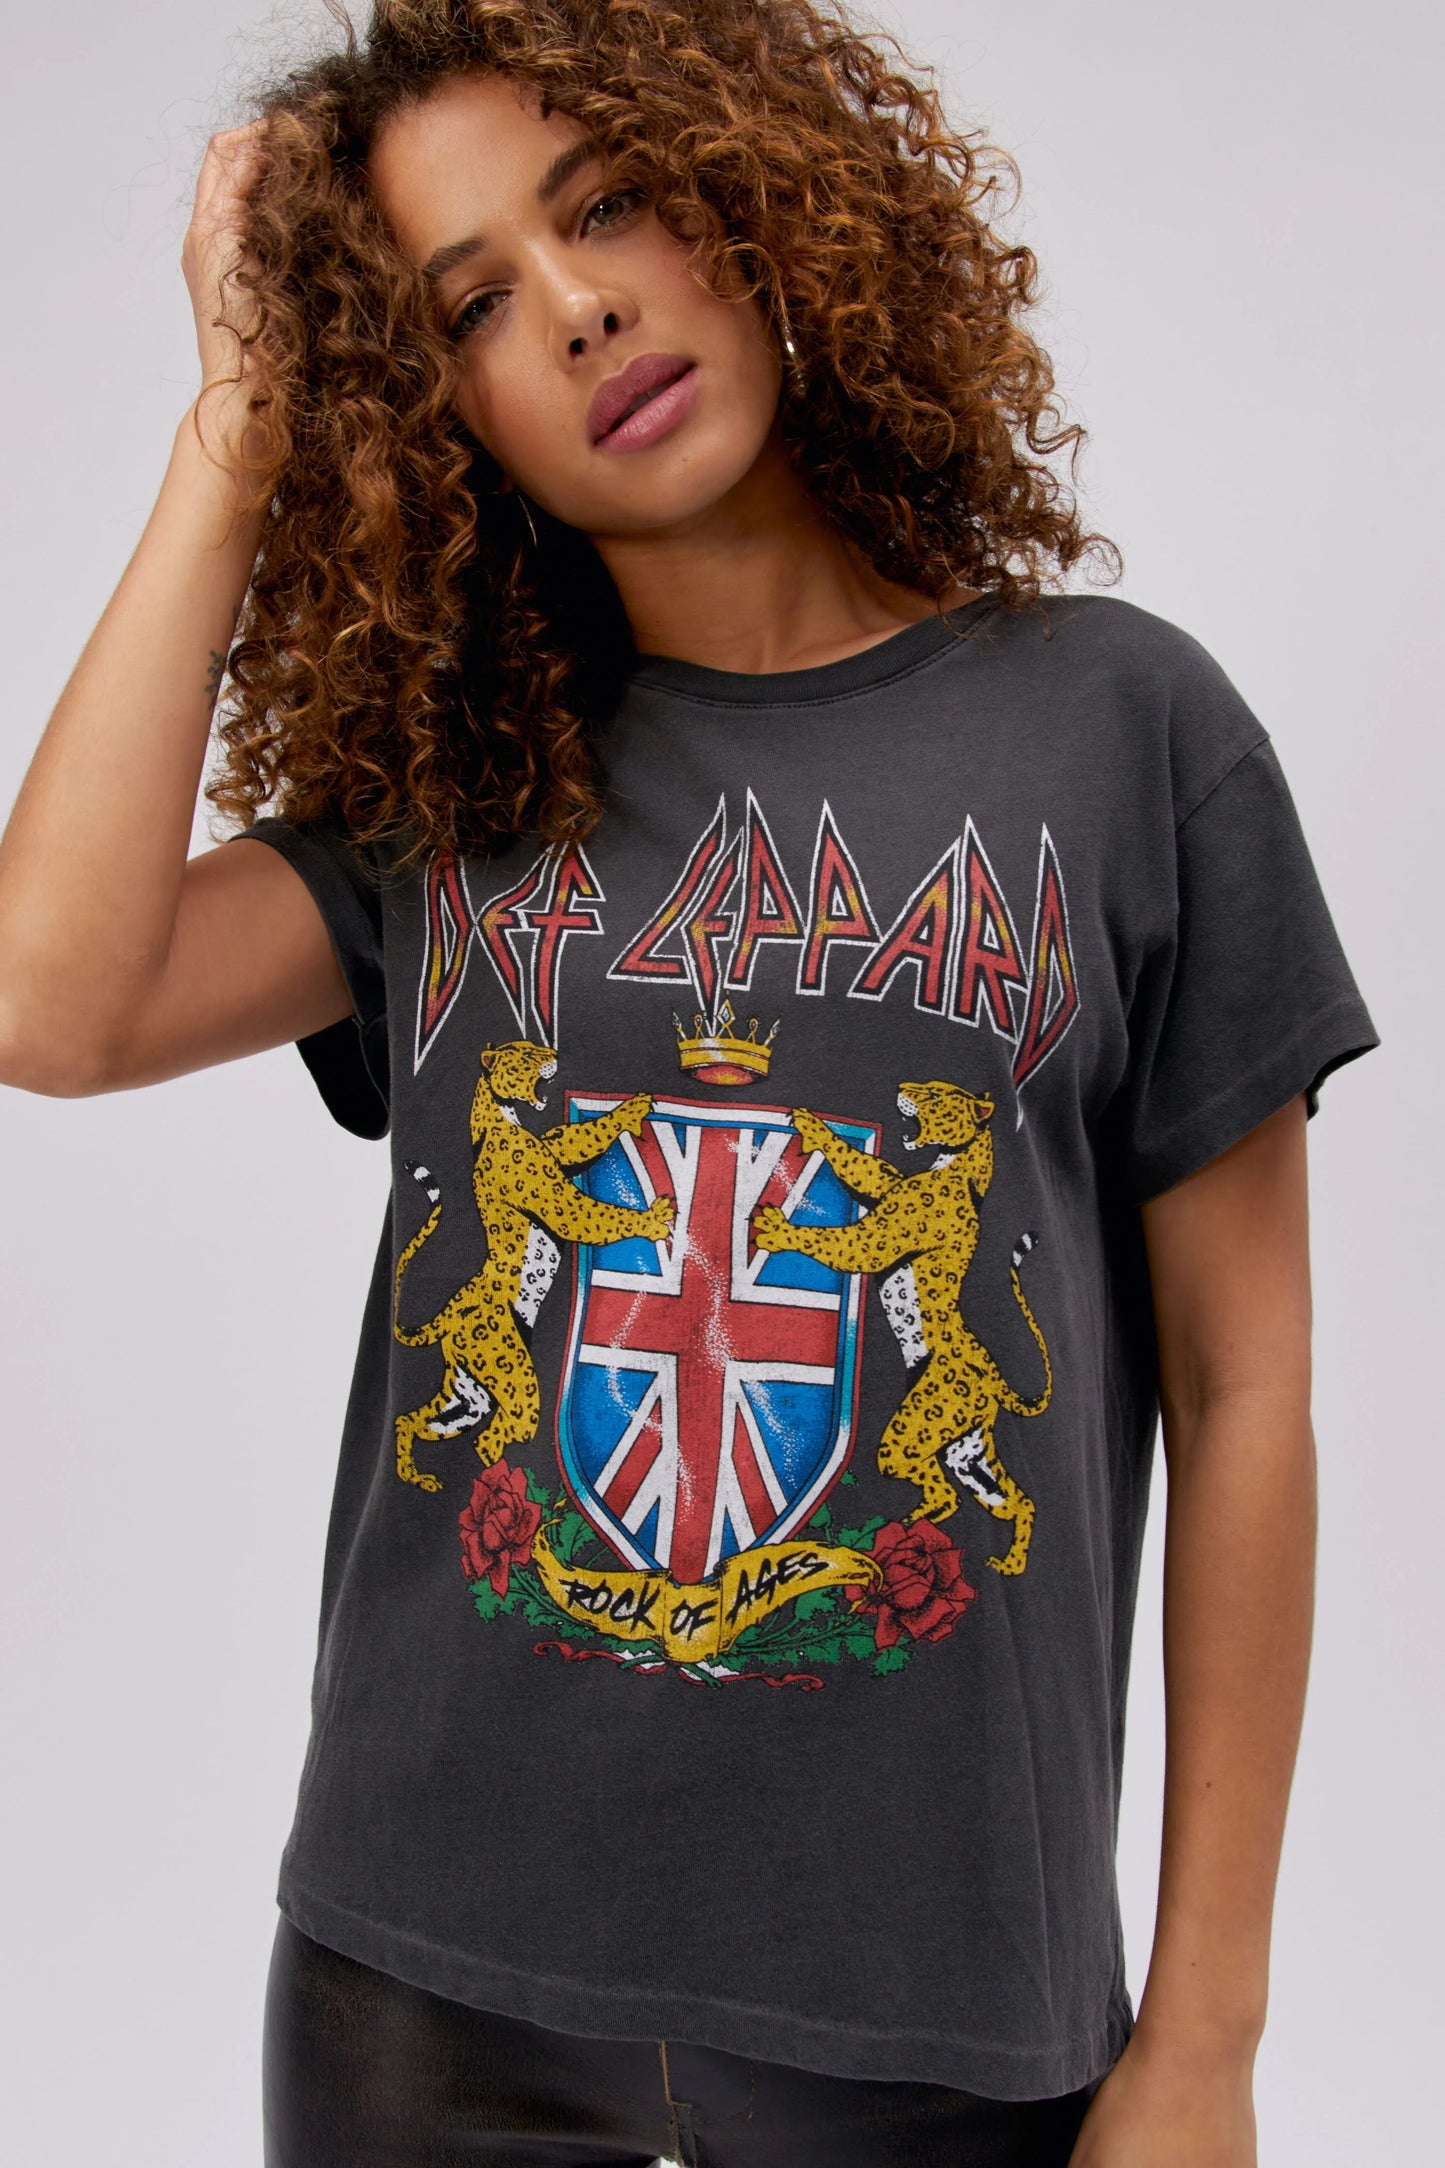 Daydreamer Def Leppard Rock of Ages Tour Tee - PIGMENT BLACK